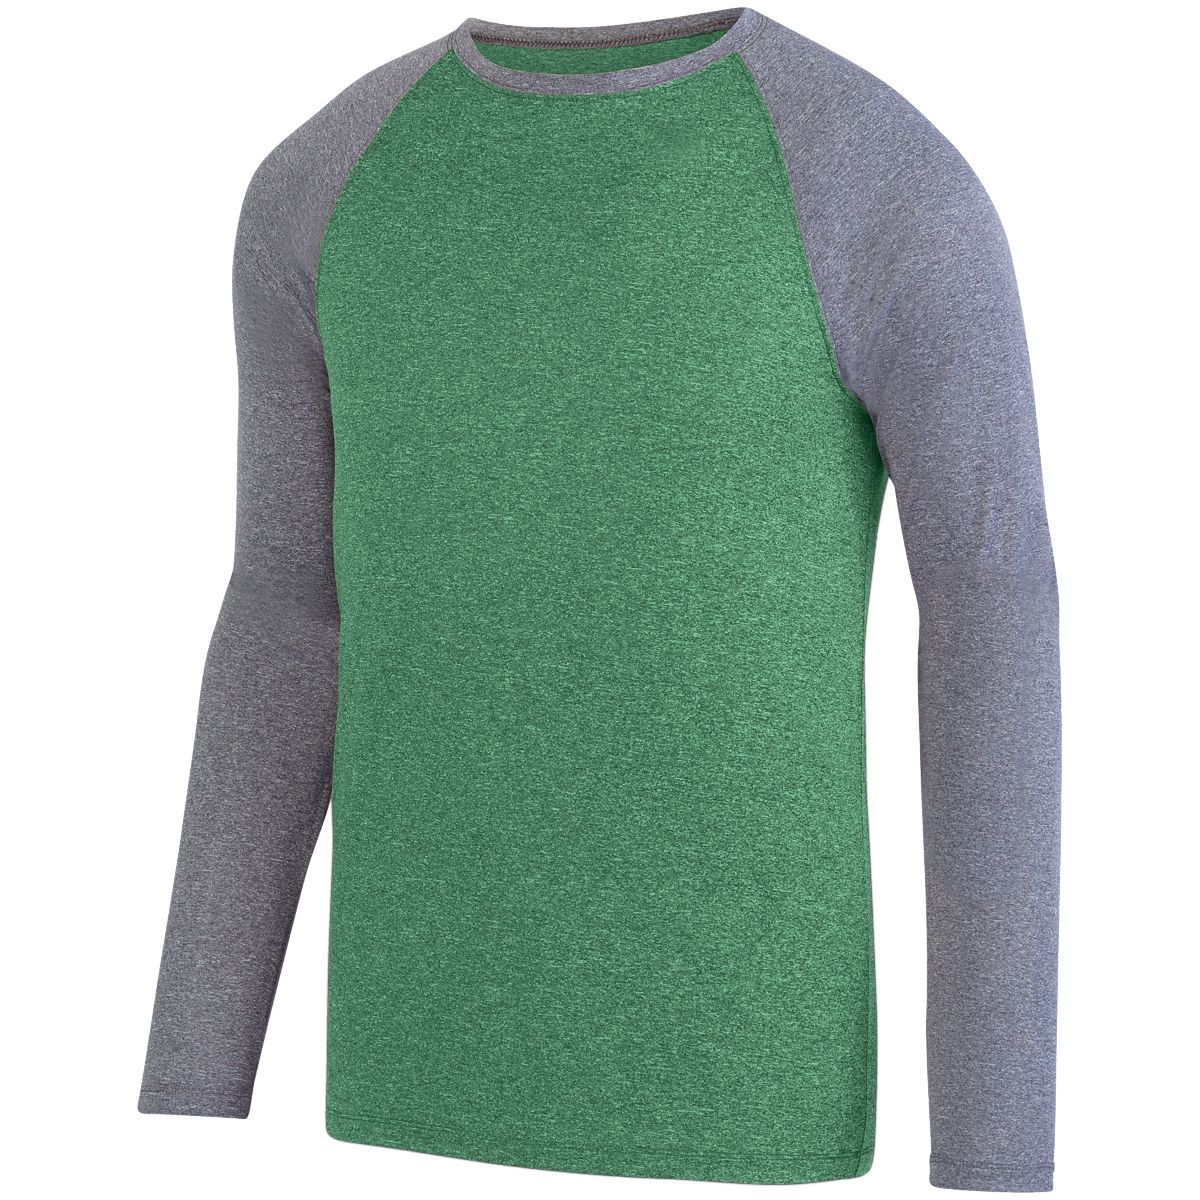 Augusta Sportswear Kinergy Two Color Long Sleeve Raglan Tee in Dark Green Heather/Graphite Heather  -Part of the Adult, Adult-Tee-Shirt, T-Shirts, Augusta-Products, Shirts product lines at KanaleyCreations.com